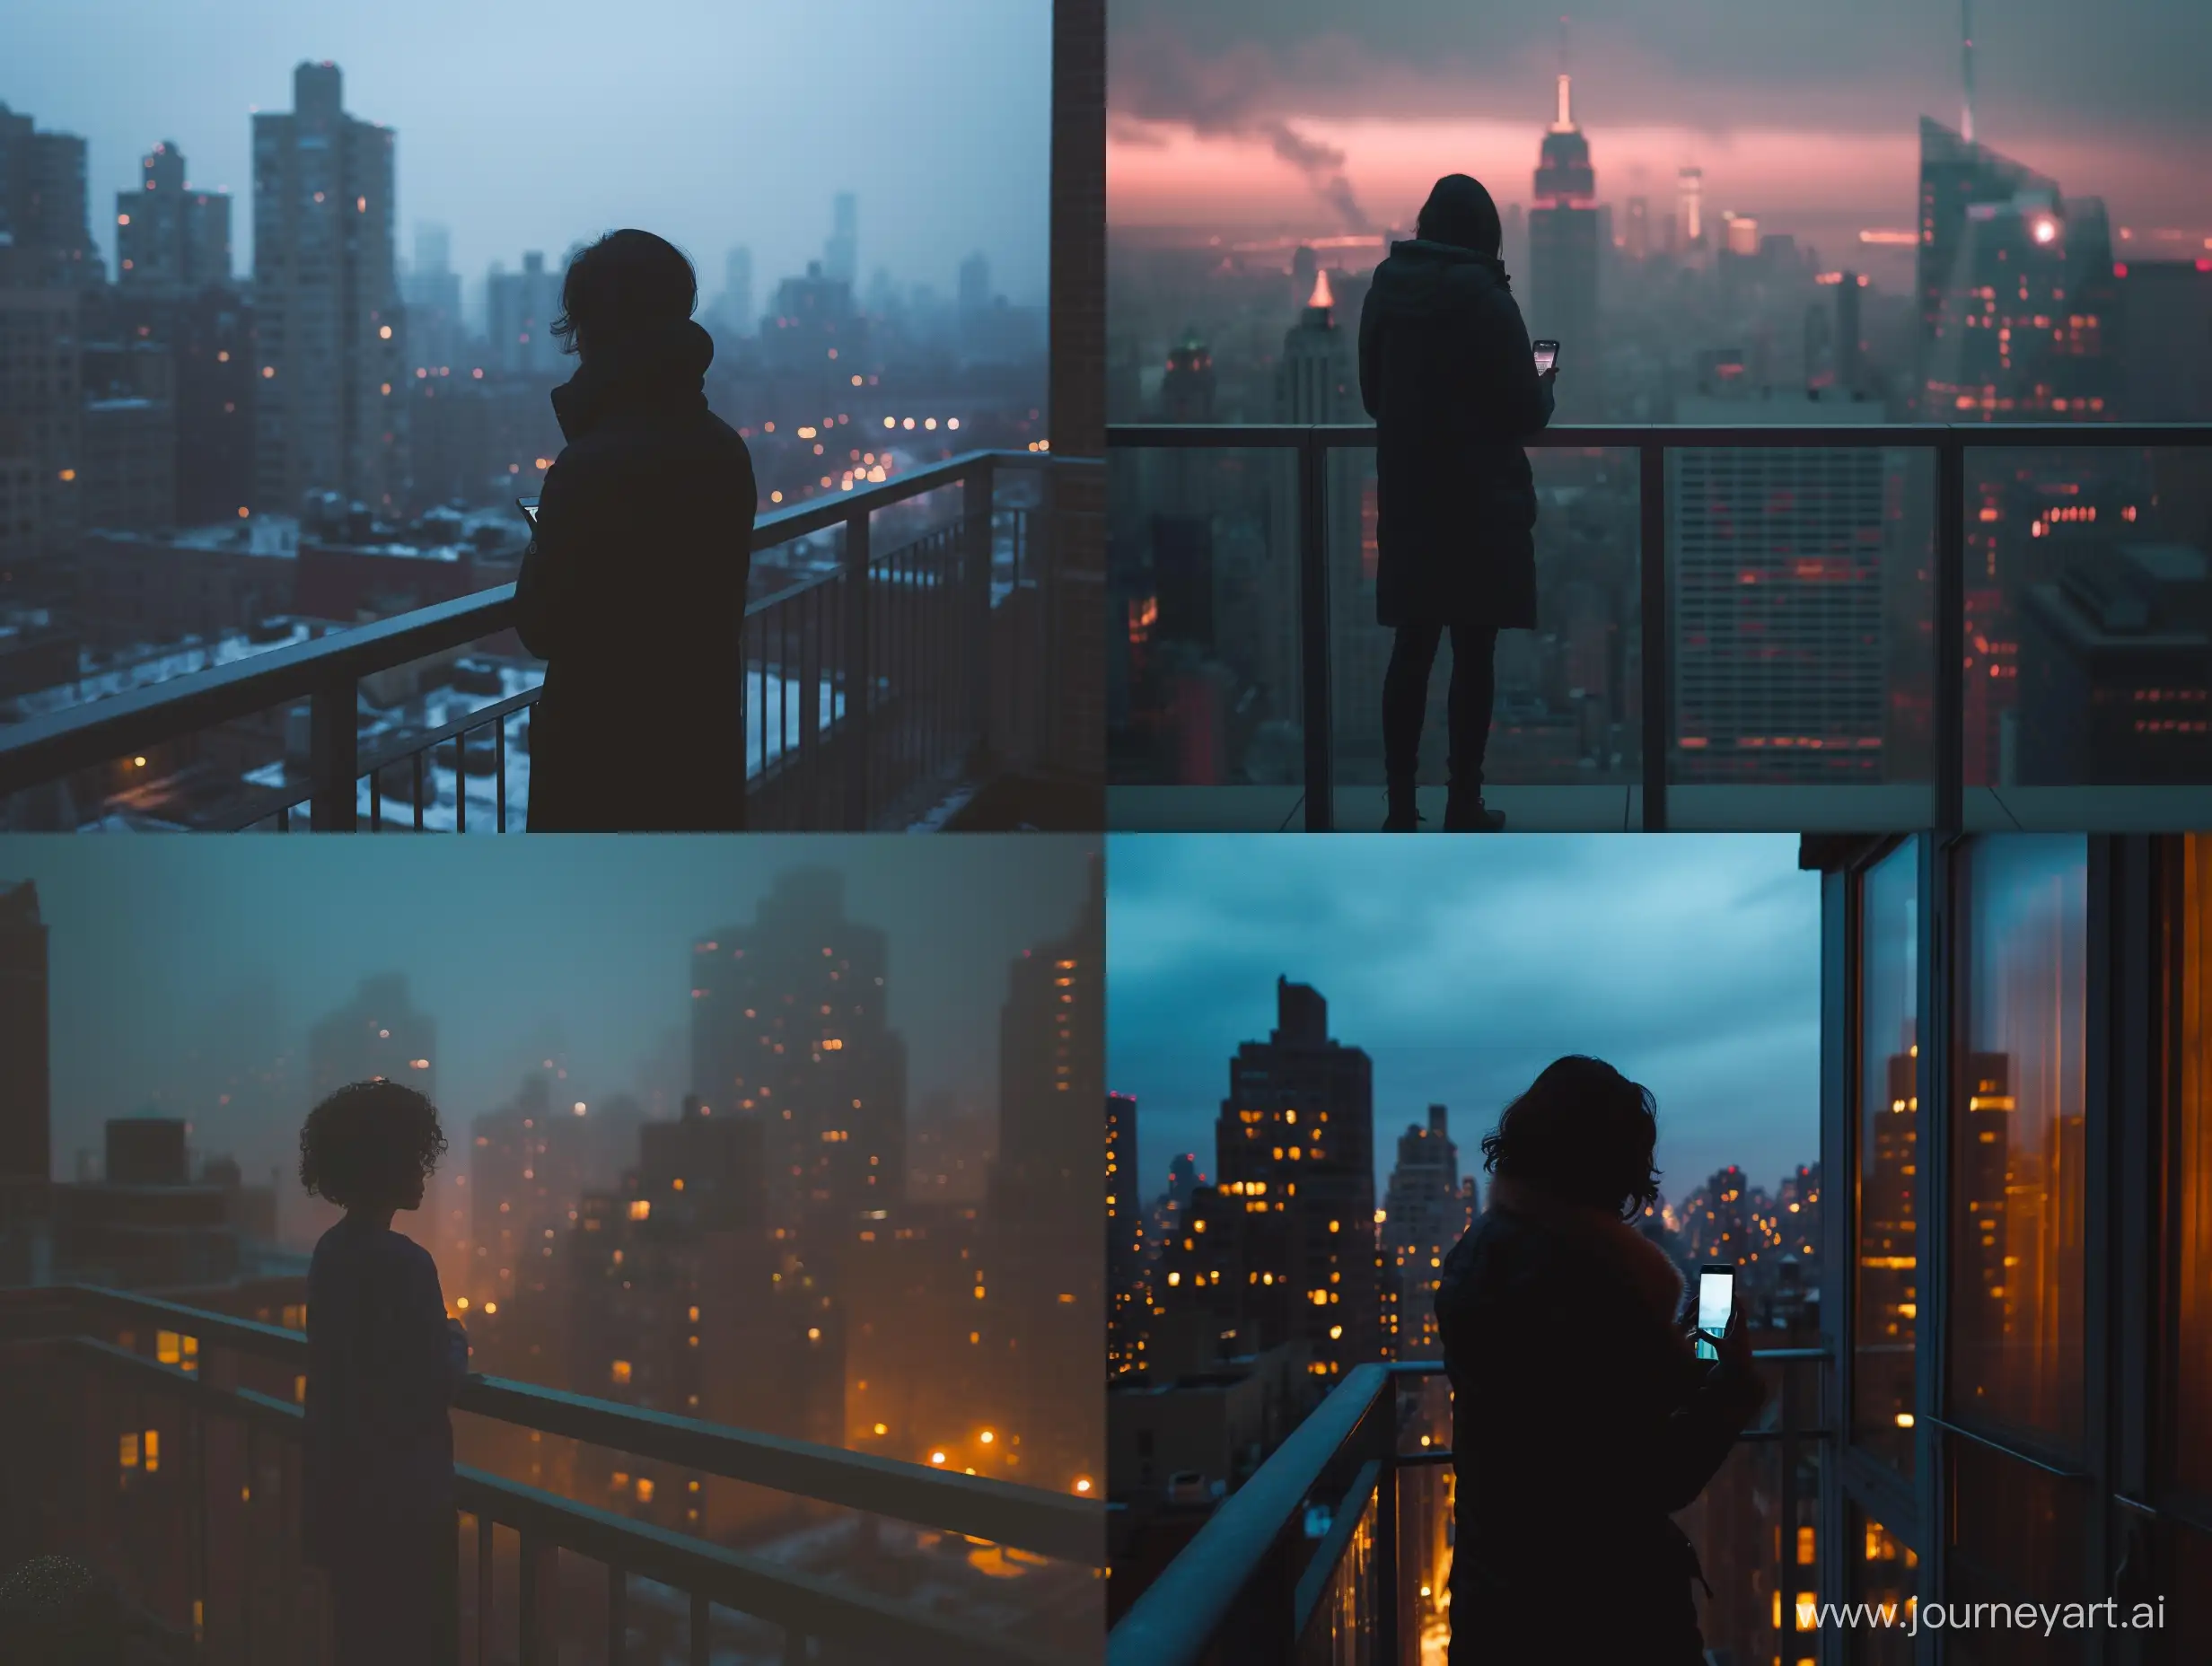 a phone photo of a person standing on the balcony, soft lighting, style raw posted on reddit in 2019, environment, looking at a city, new york